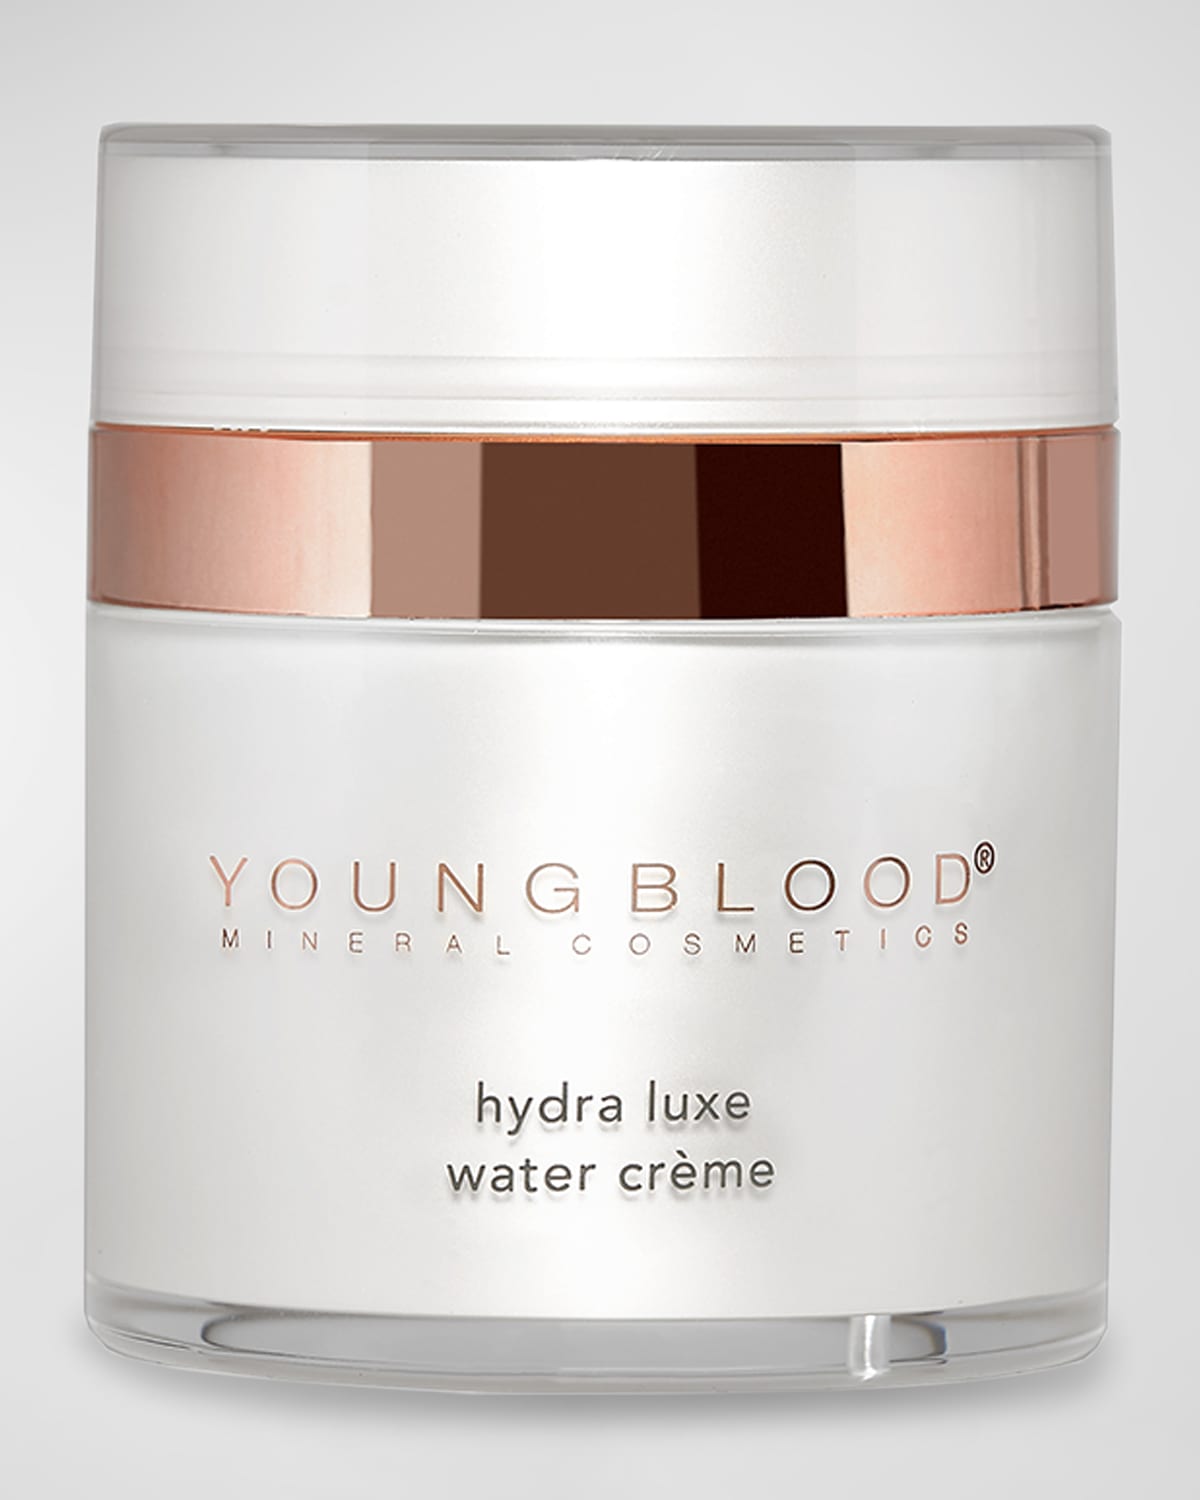 Hydra Luxe Water Creme, 0.5 oz.